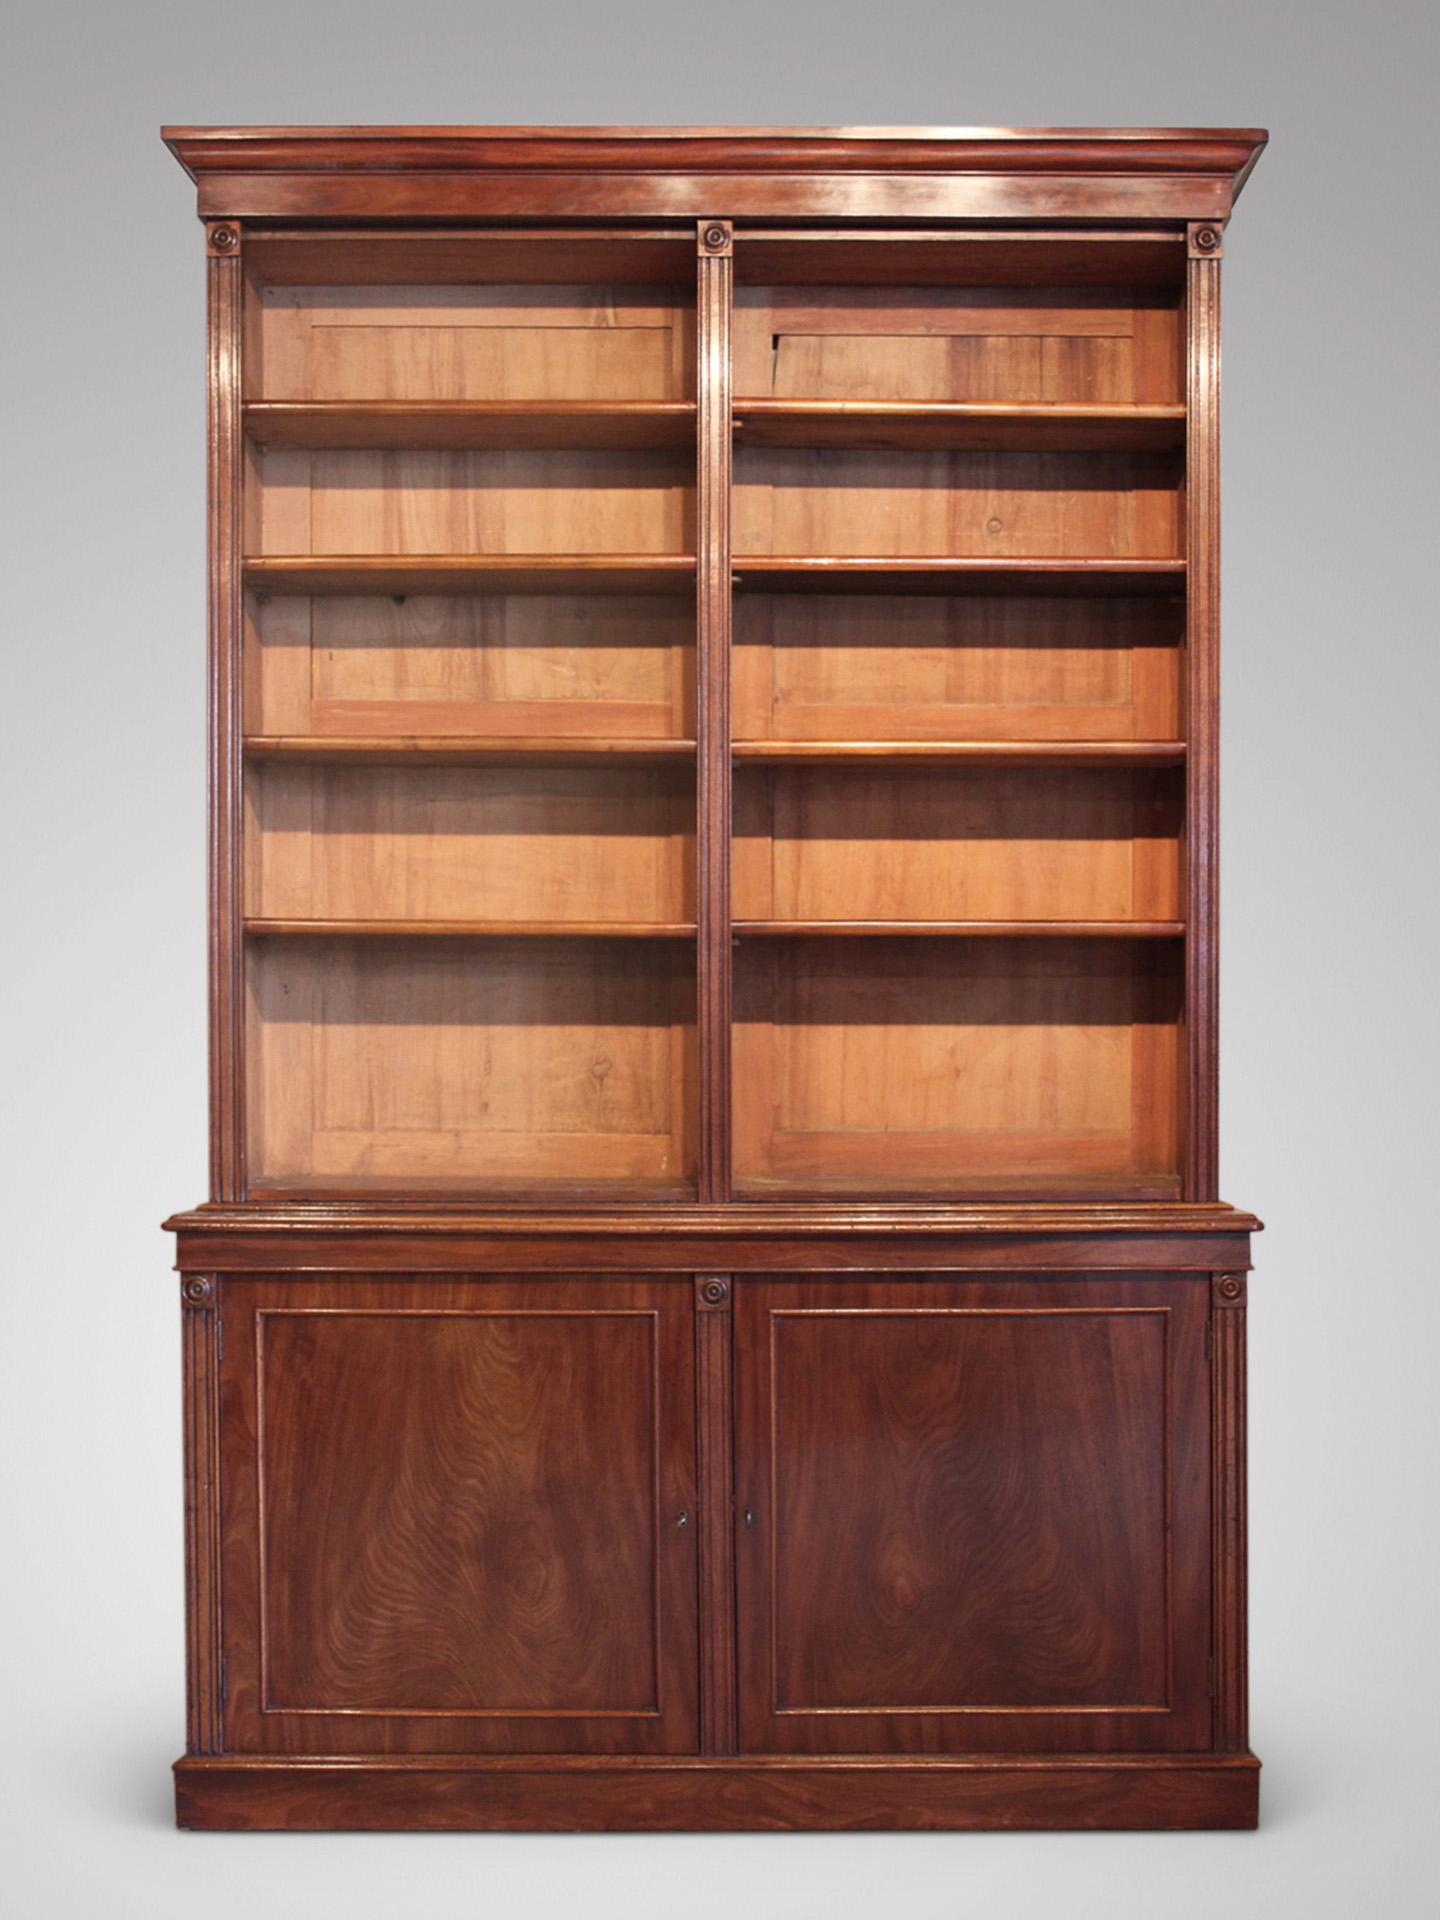 A very fine early 19th century, William IV period mahogany open library bookcase, the moulded cornice above an open bookcase with adjustable shelves, the lower section with two panelled cupboard doors, standing on an integral plinth base. England